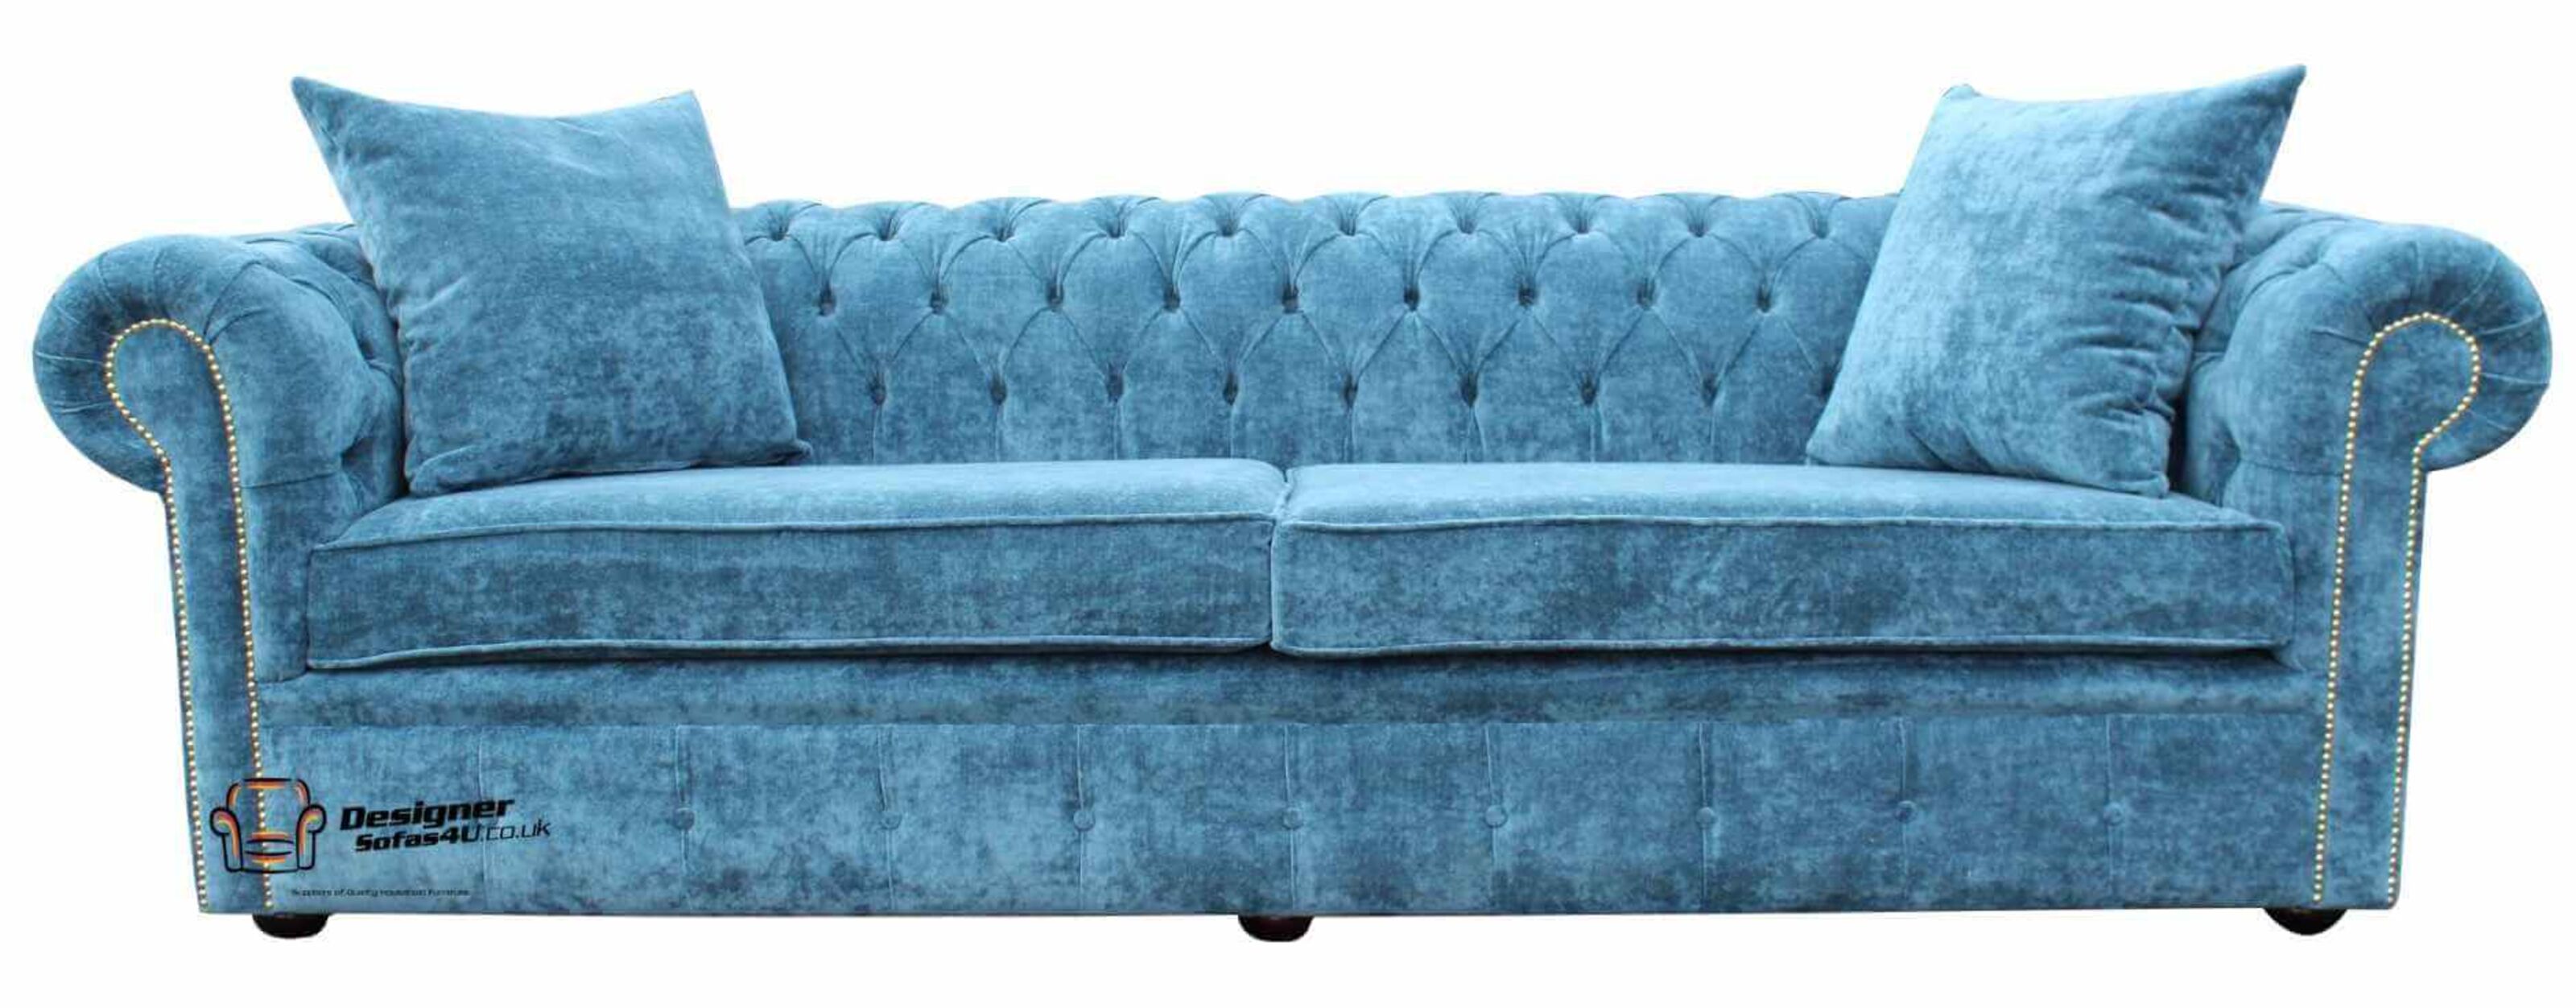 Plush Additions Chesterfield Sofas Adorned with Accent Pillows  %Post Title